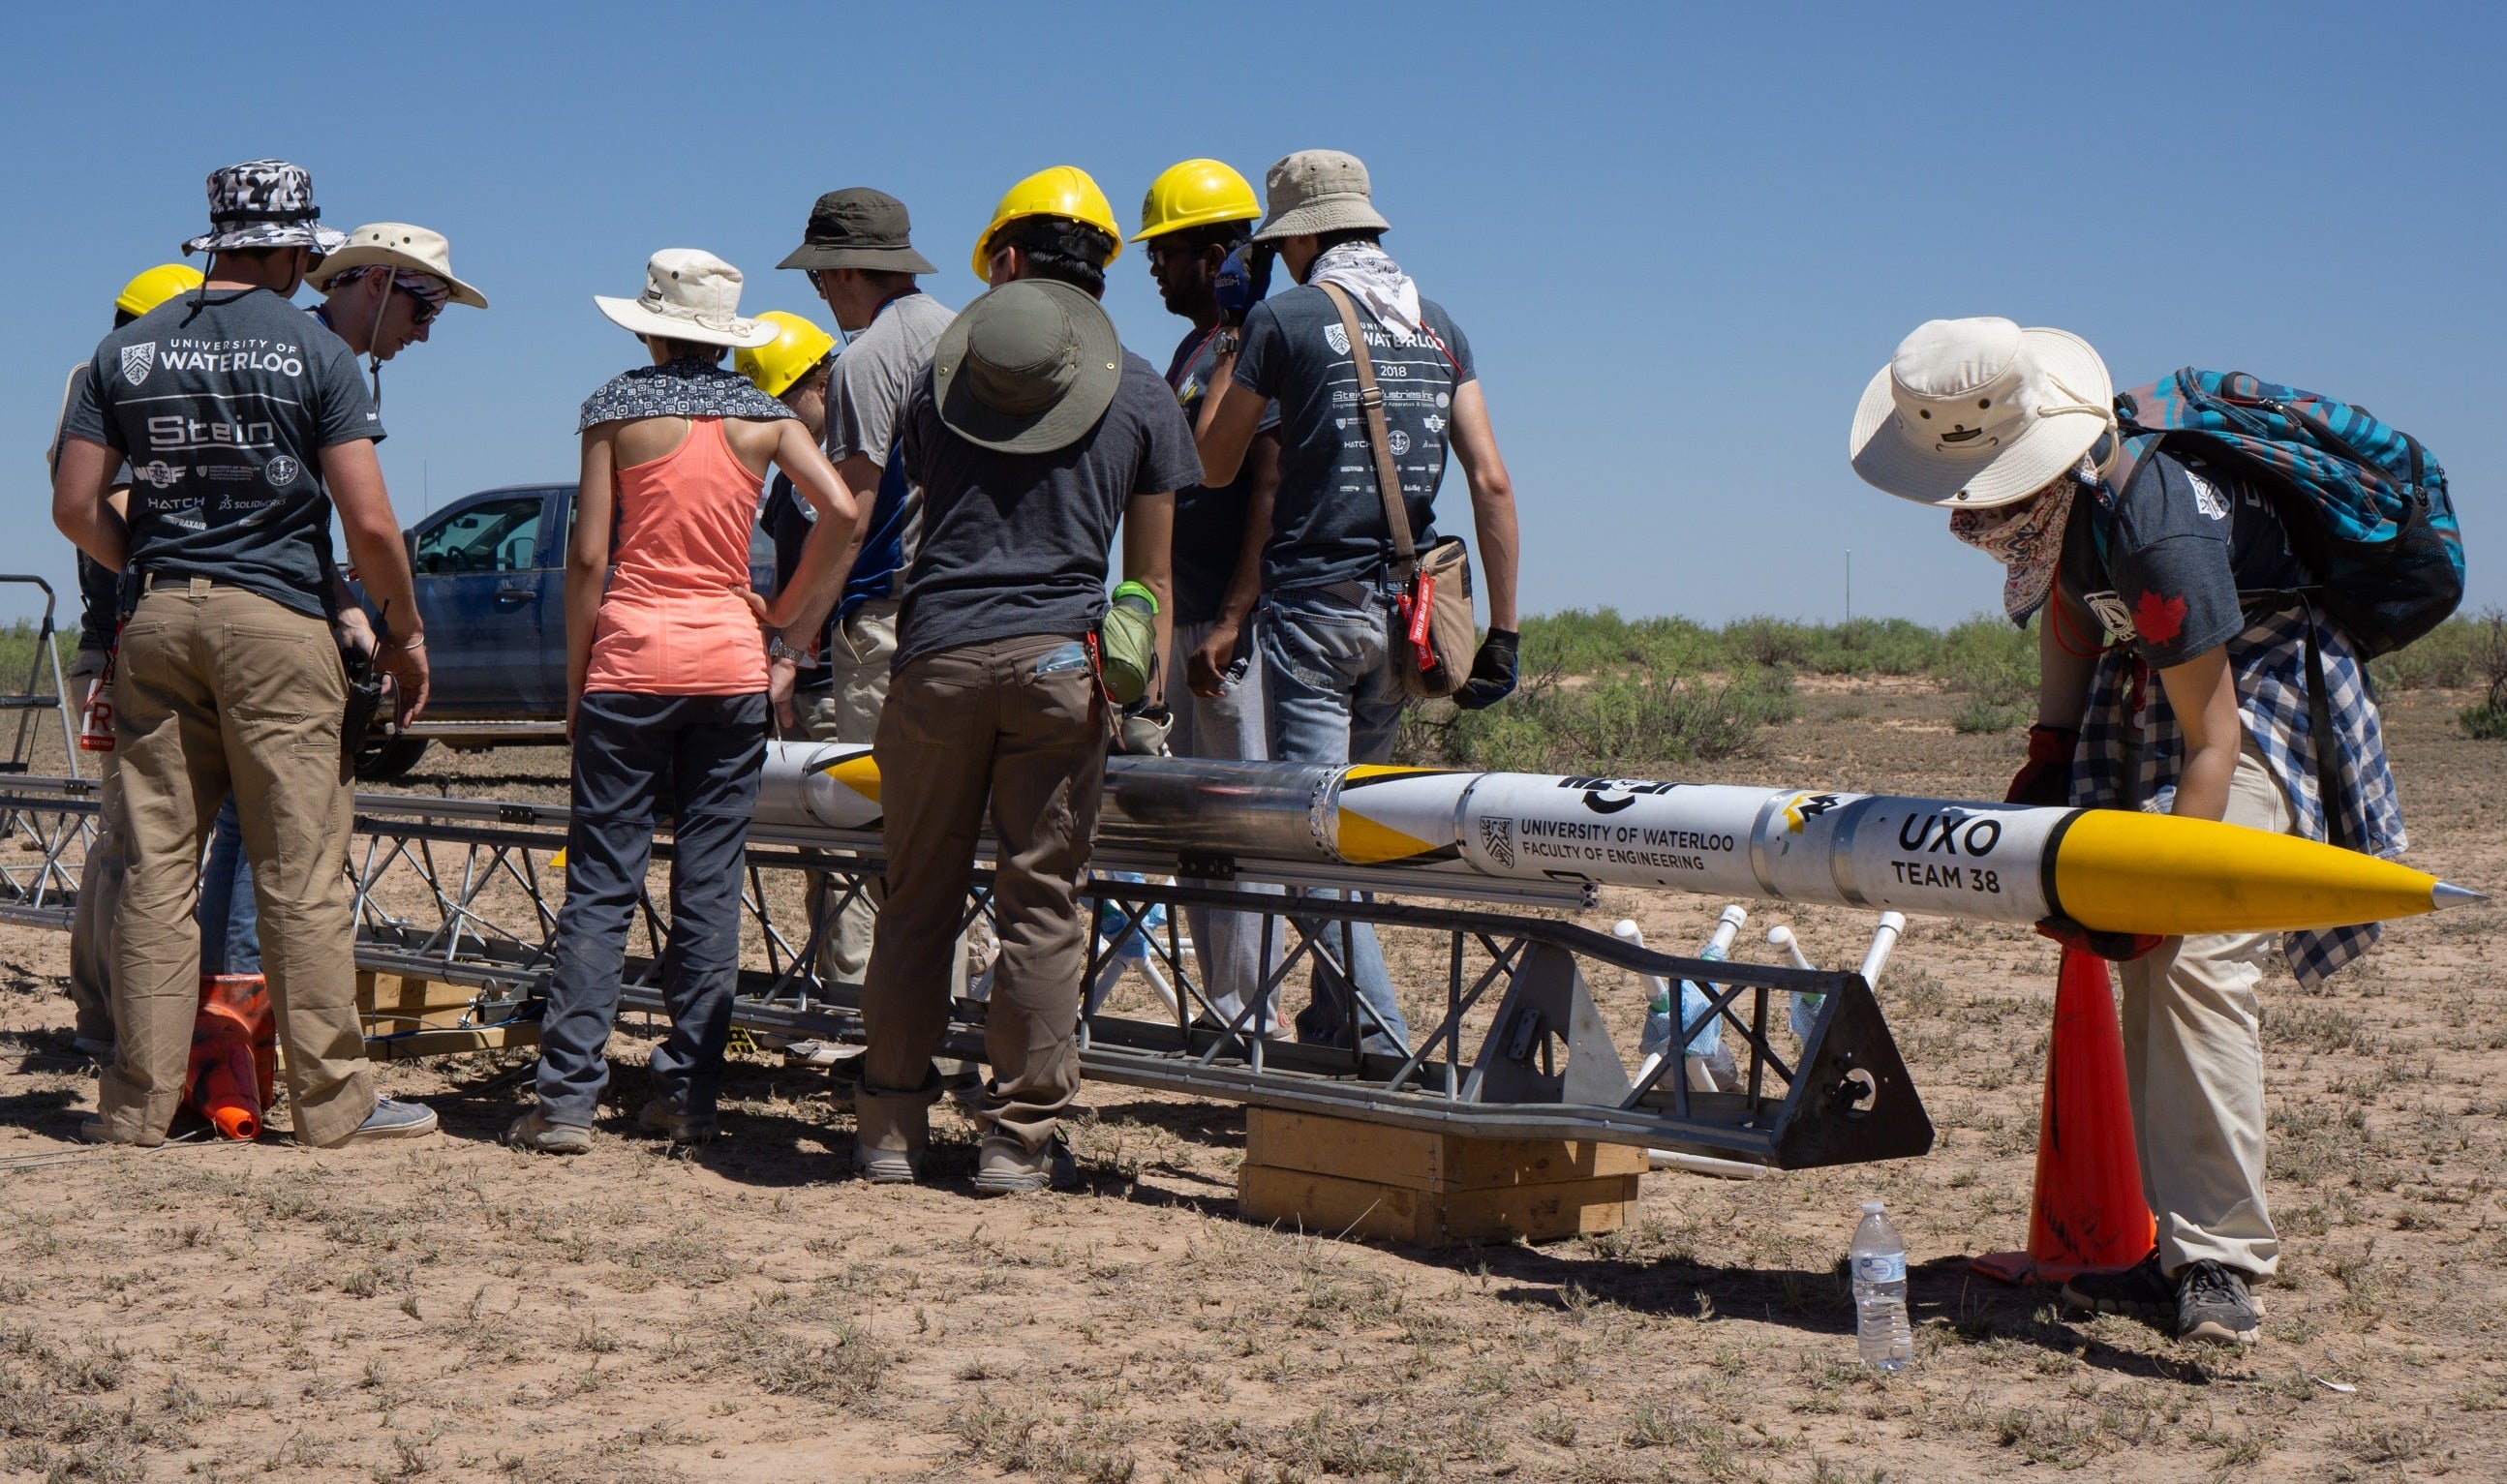 Members of a Waterloo Engineering student design team prepare to launch their new rocket, Unexploded Ordnance (UXO), during a recent competition in New Mexico, where they finished first in their category.